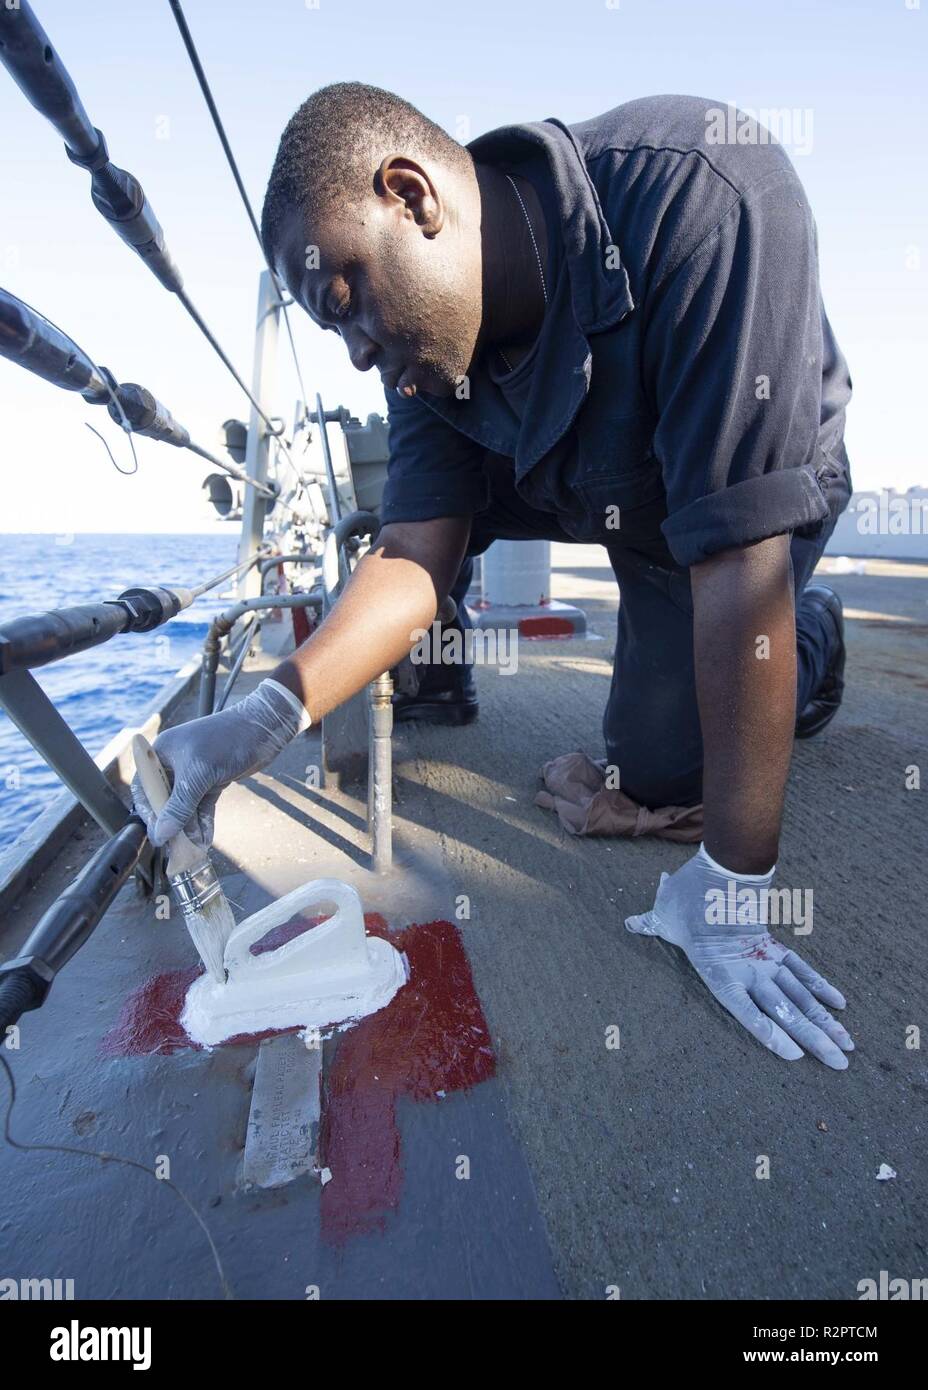 MEDITERRANEAN SEA (Oct. 29, 2018) Seaman Eyatom Pini paints a deck fixture aboard the Arleigh Burke-class guided-missile destroyer USS Arleigh Burke (DDG 51) in the Mediterranean Sea Oct. 29, 2018. Arleigh Burke, homeported at Naval Station Norfolk, is conducting naval operations in the U.S. 6th Fleet area of operations in support of U.S. national security interests in Europe and Africa. Stock Photo